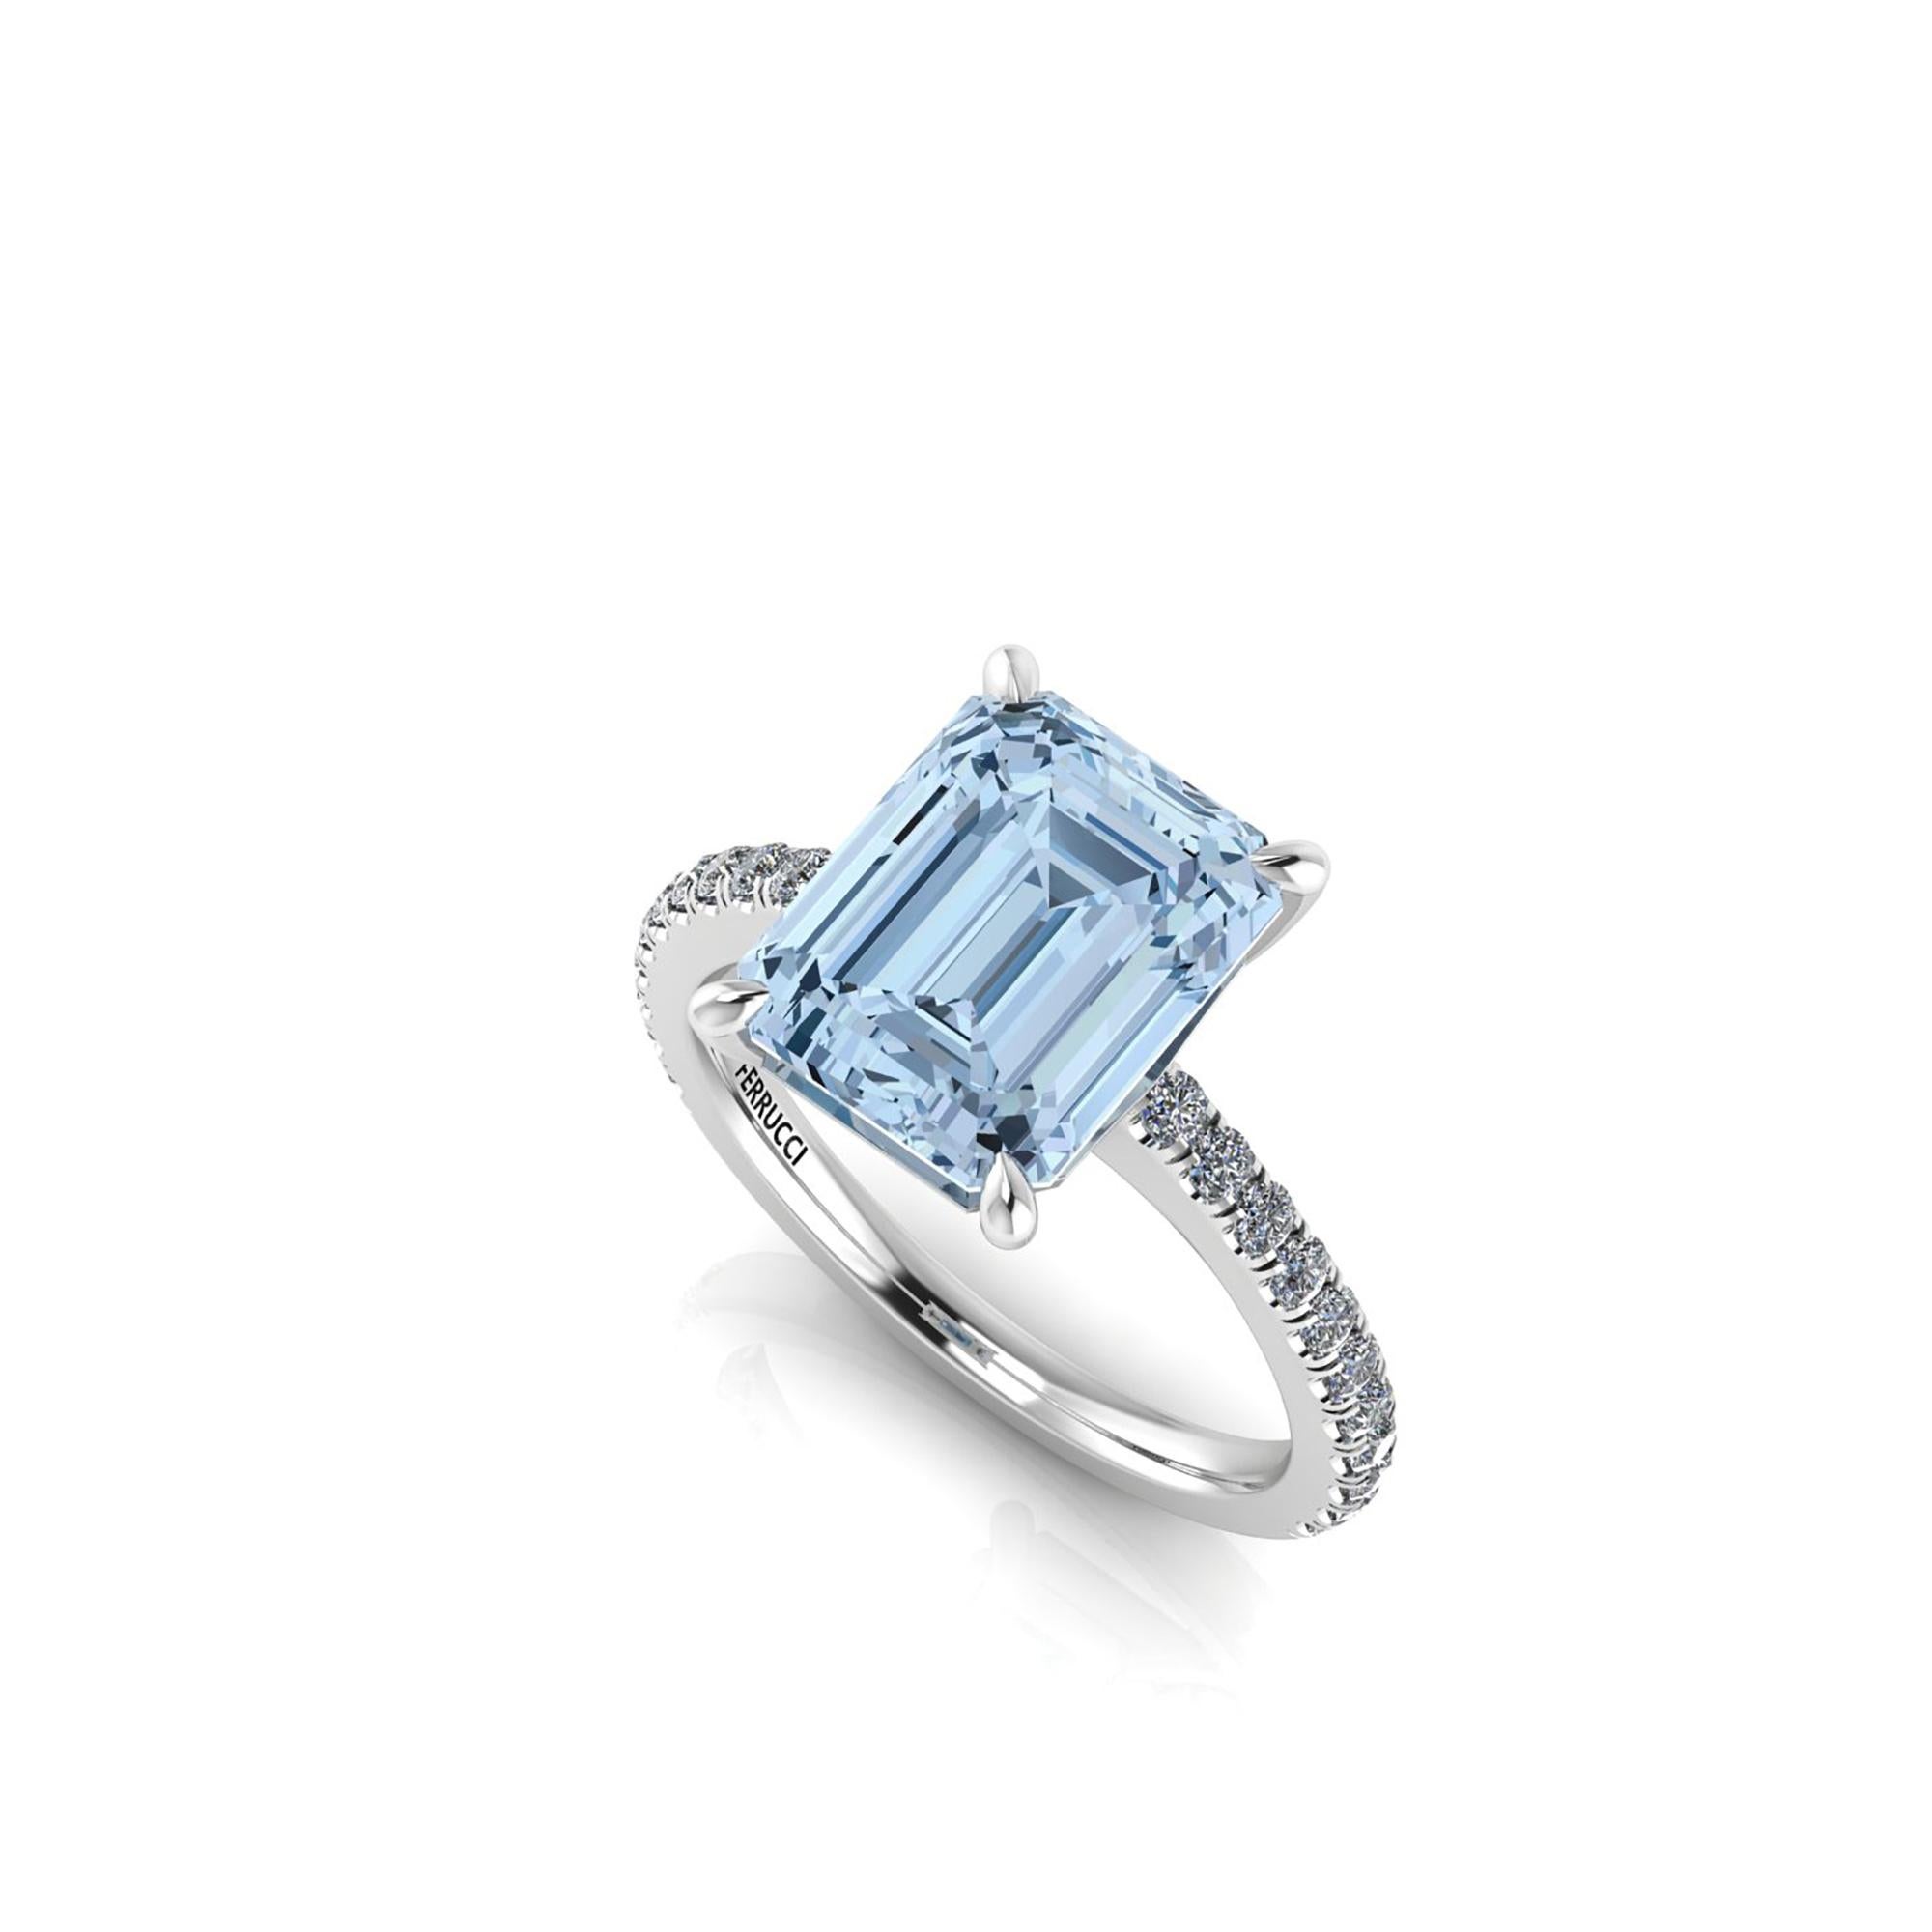 4.54 carat Aquamarine, emerald cut, very high quality color, eye clean gem, accompanied a pave' of bright diamonds of approximately  total carat weight of 0.38 carat, set in an hand crafted, delicate and sophisticated looking Platinum 950 ring,